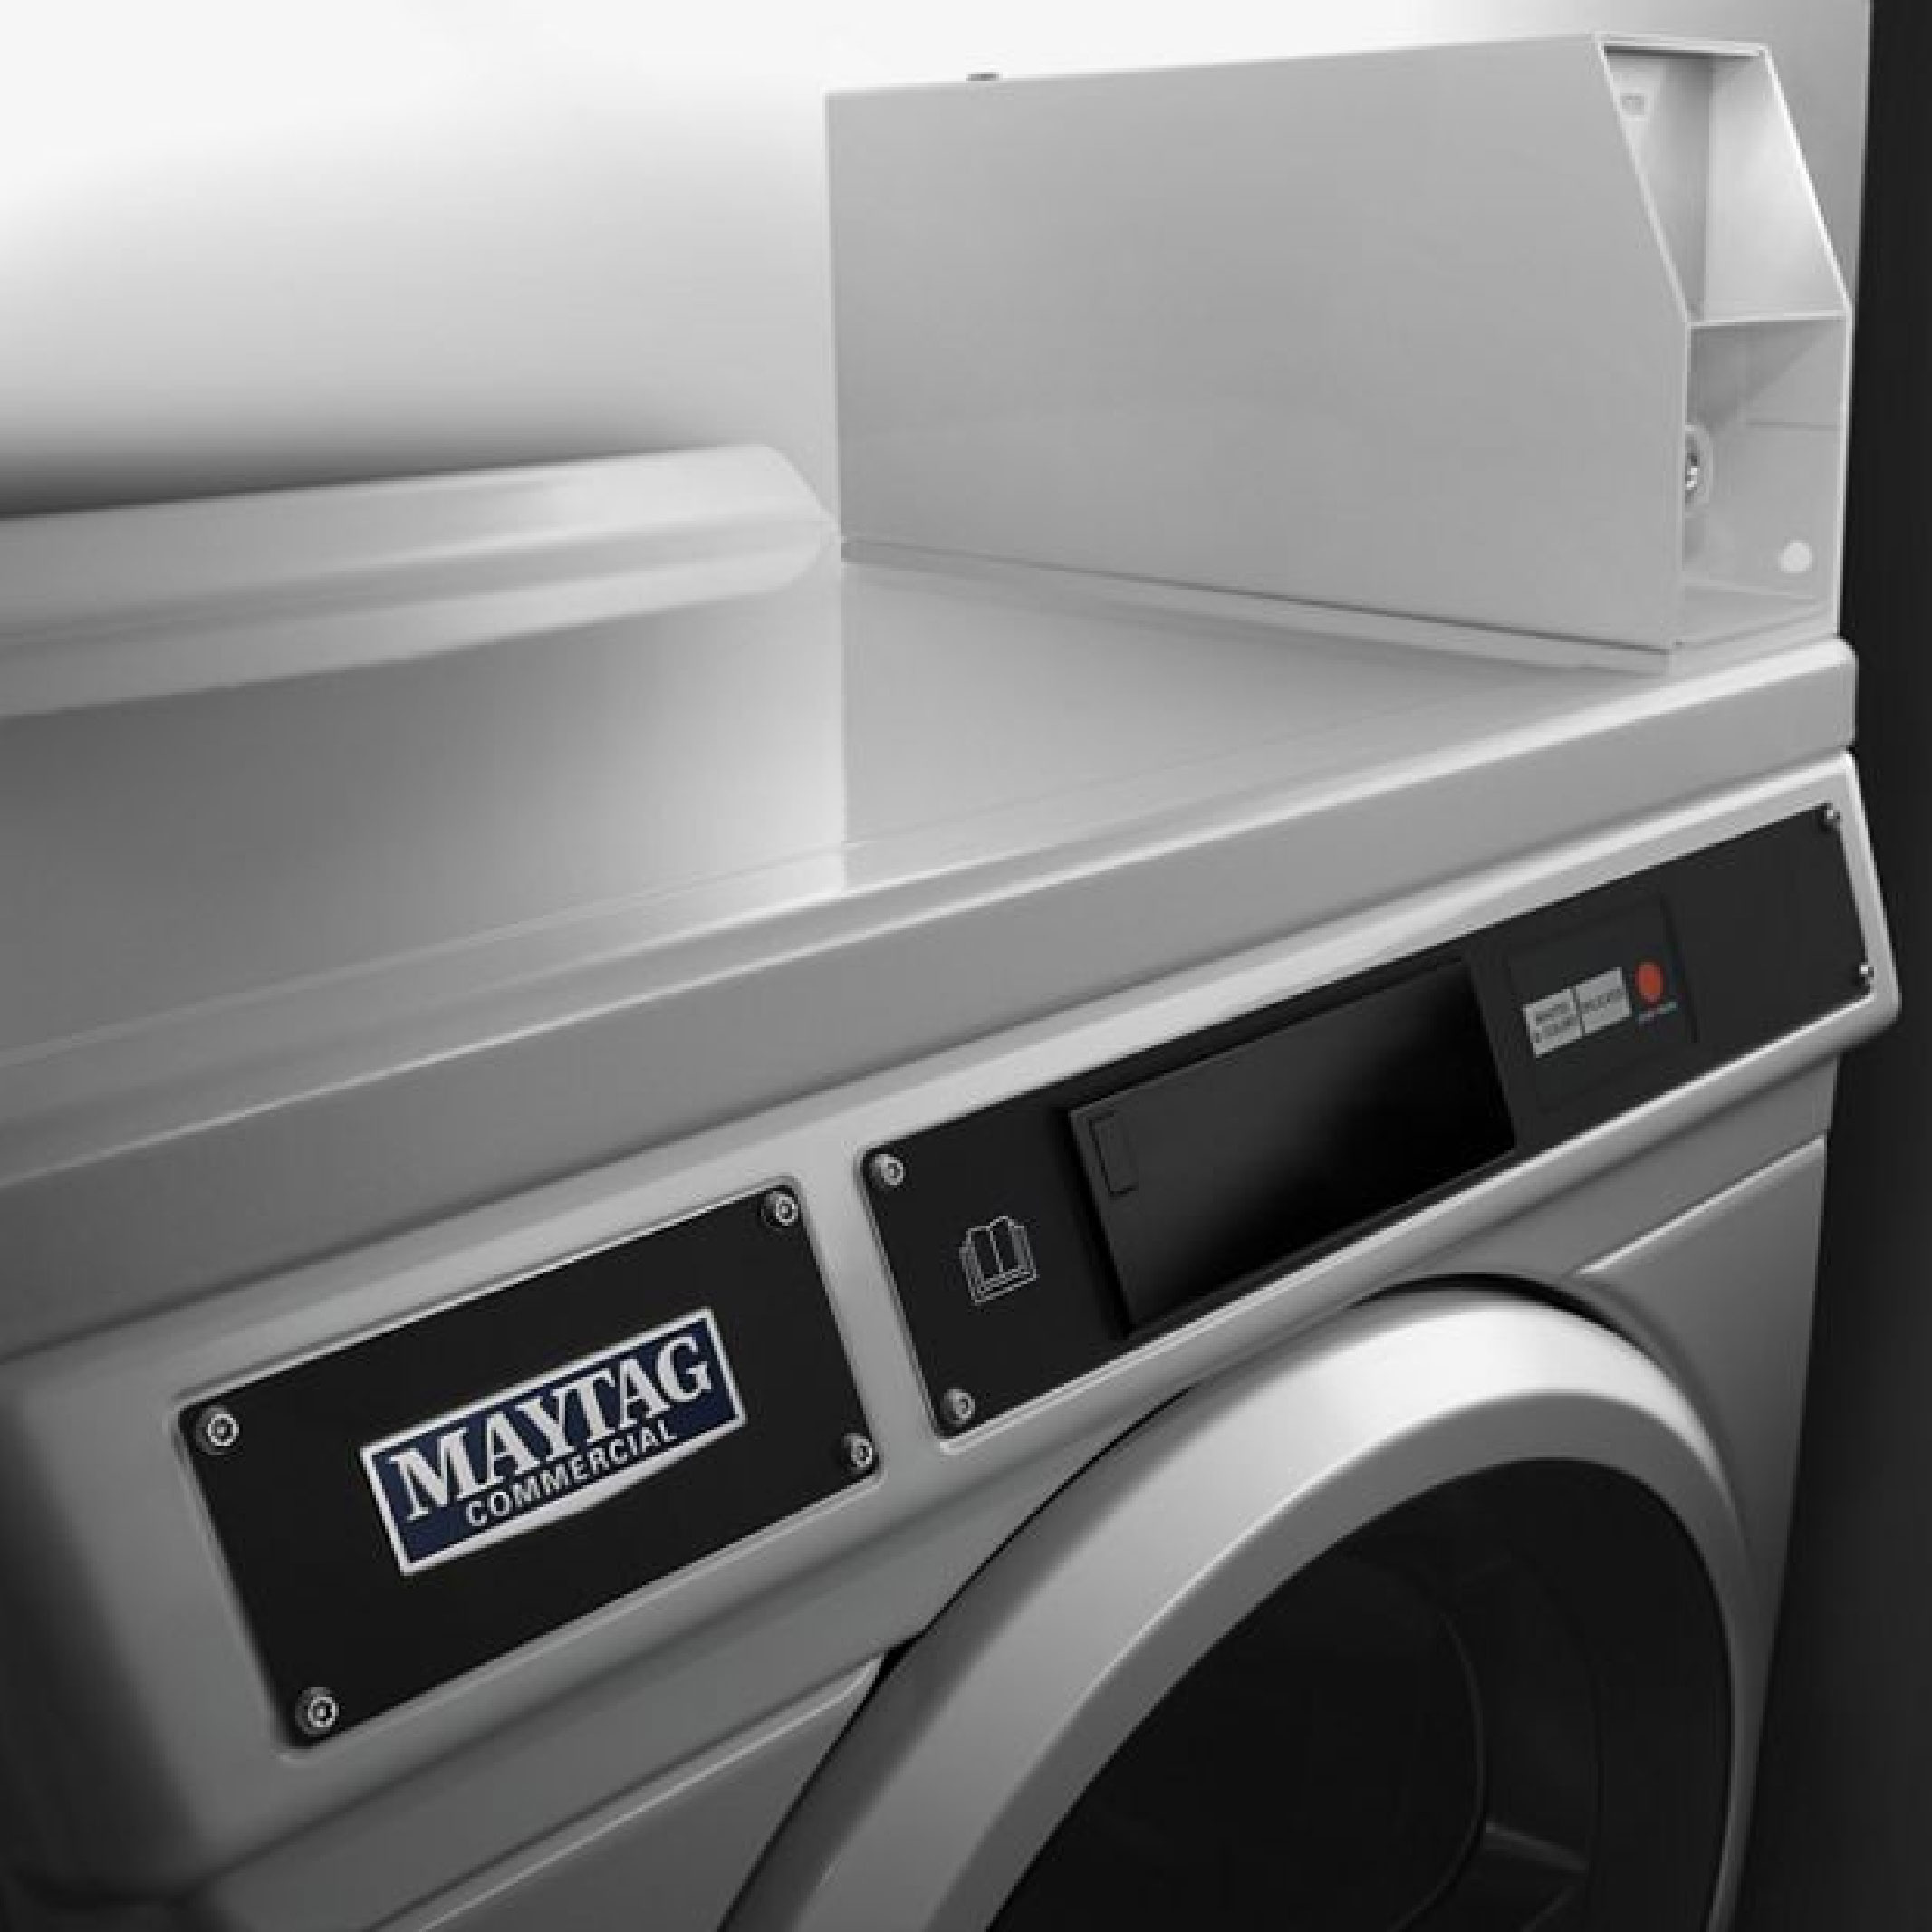 https://www.mitralaundry.com/wp-content/uploads/2017/07/product-MAYTAG-41.jpg